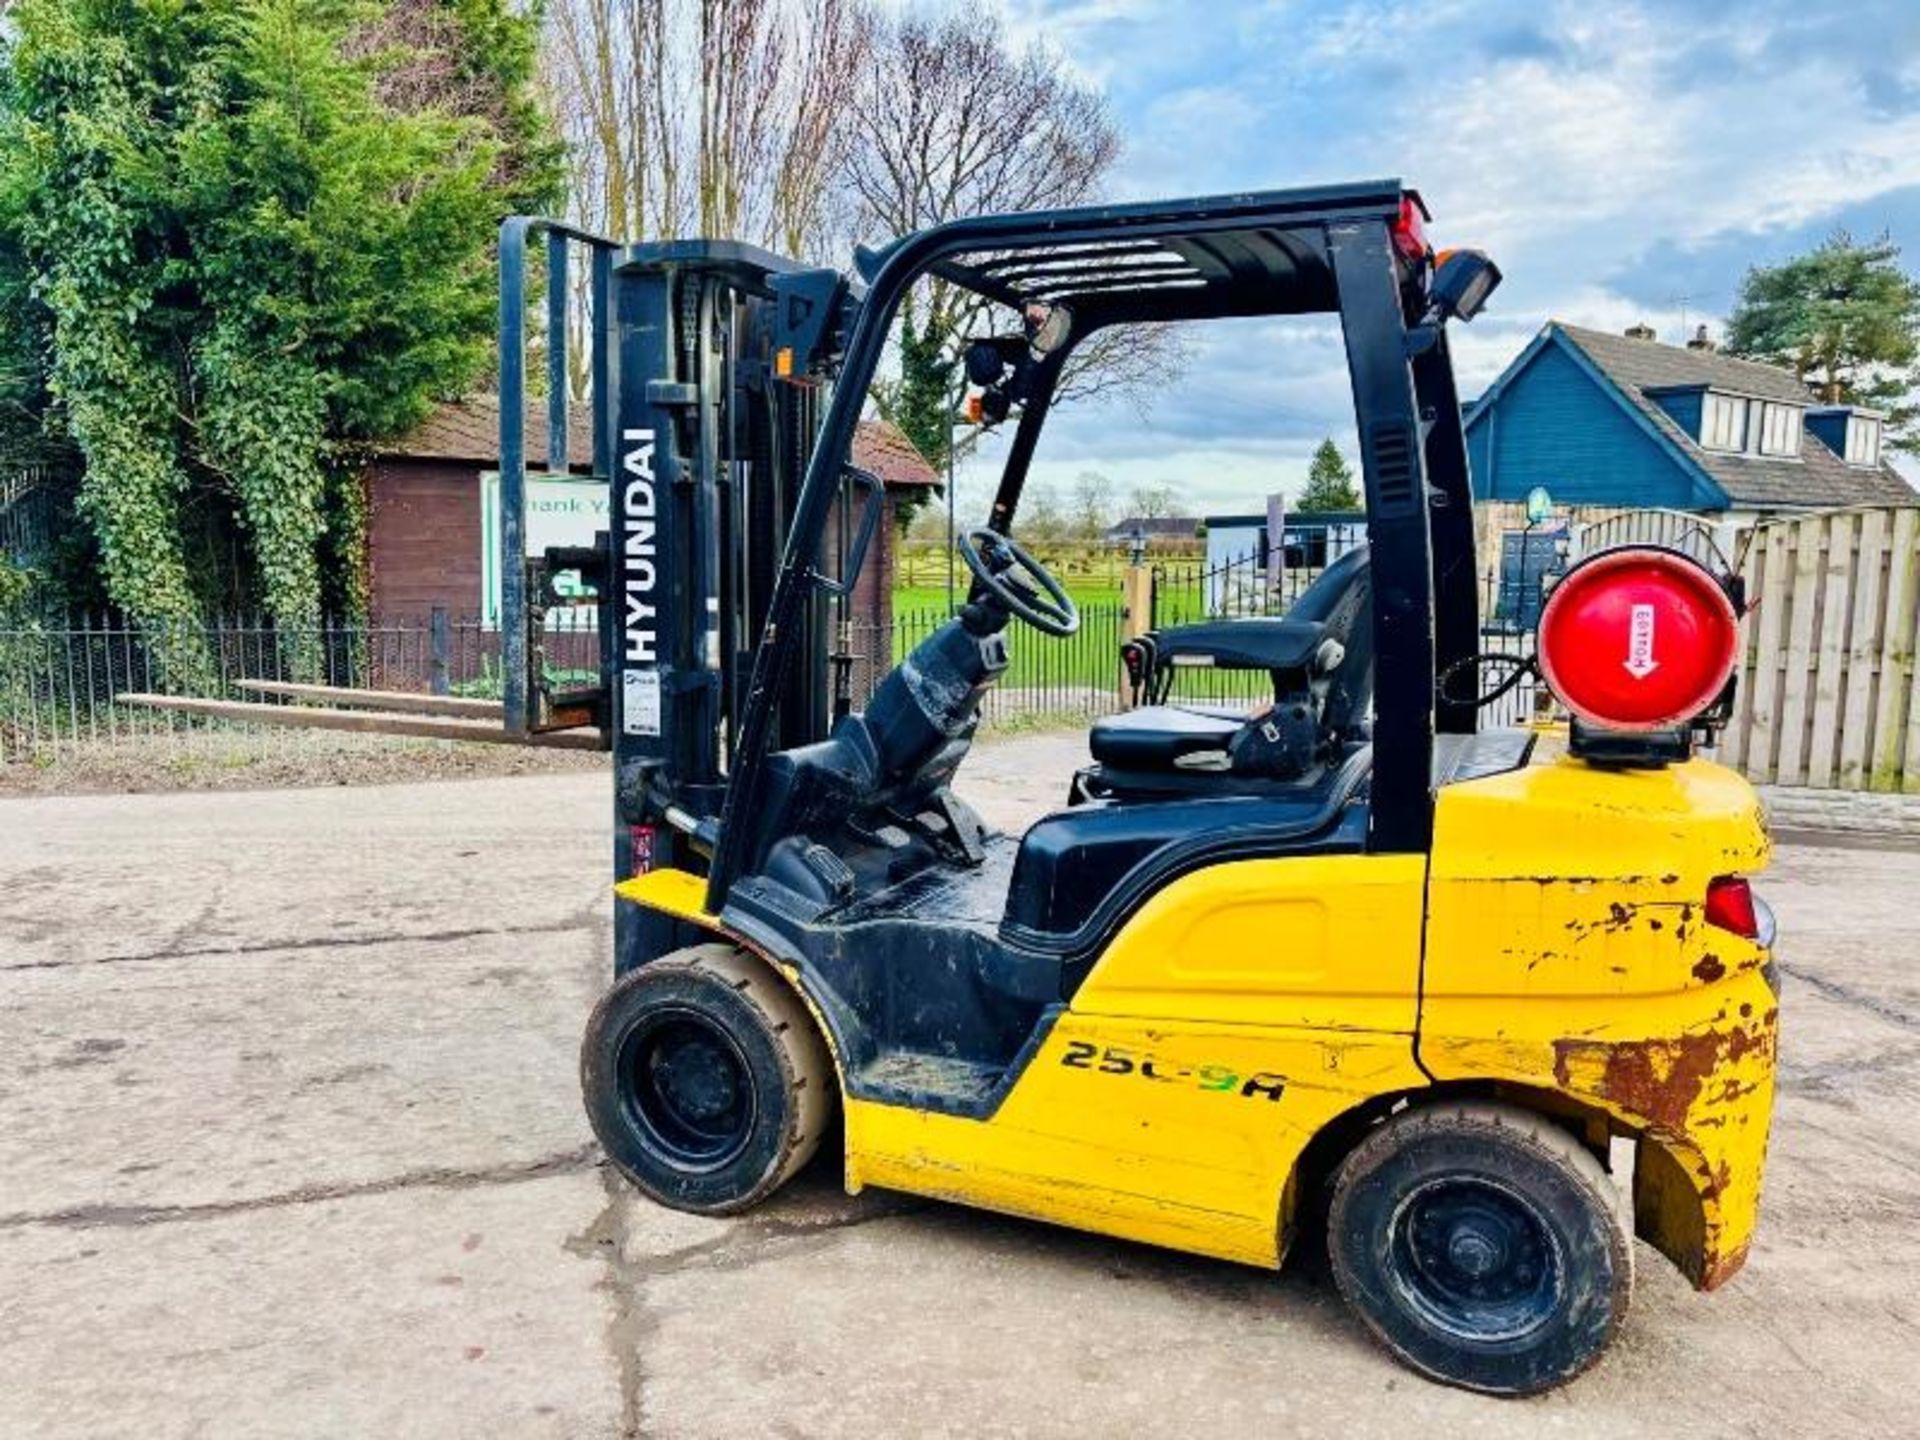 HYUNDAI 25L-9A CONTAINER SPEC FORKLIFT *YEAR 2017, 4463 HOURS* C/W PALLET TINES - Image 8 of 18